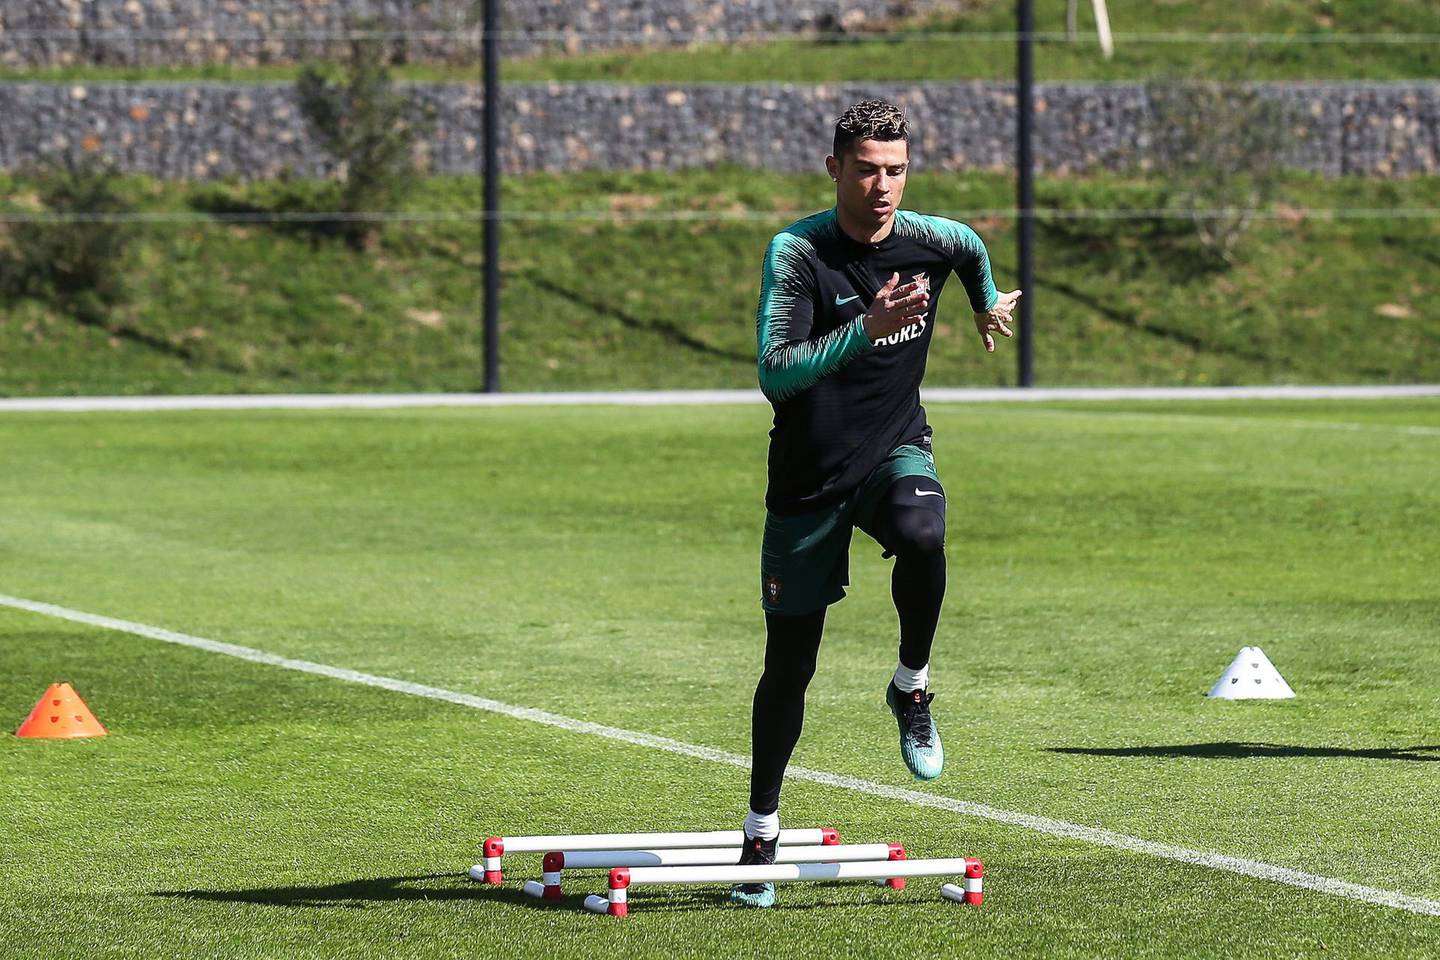 epa06620067 Portuguese national soccer team striker Cristiano Ronaldo performs during his team's training session at Cidade do Futebol in Oeiras, near Lisbon, Portugal, 22 March 2018. Portugal will face Egypt on 23 March and the Netherlands on 26 March 2018 in their upcoming International Friendly matches.  EPA/ANTONIO COTRIM